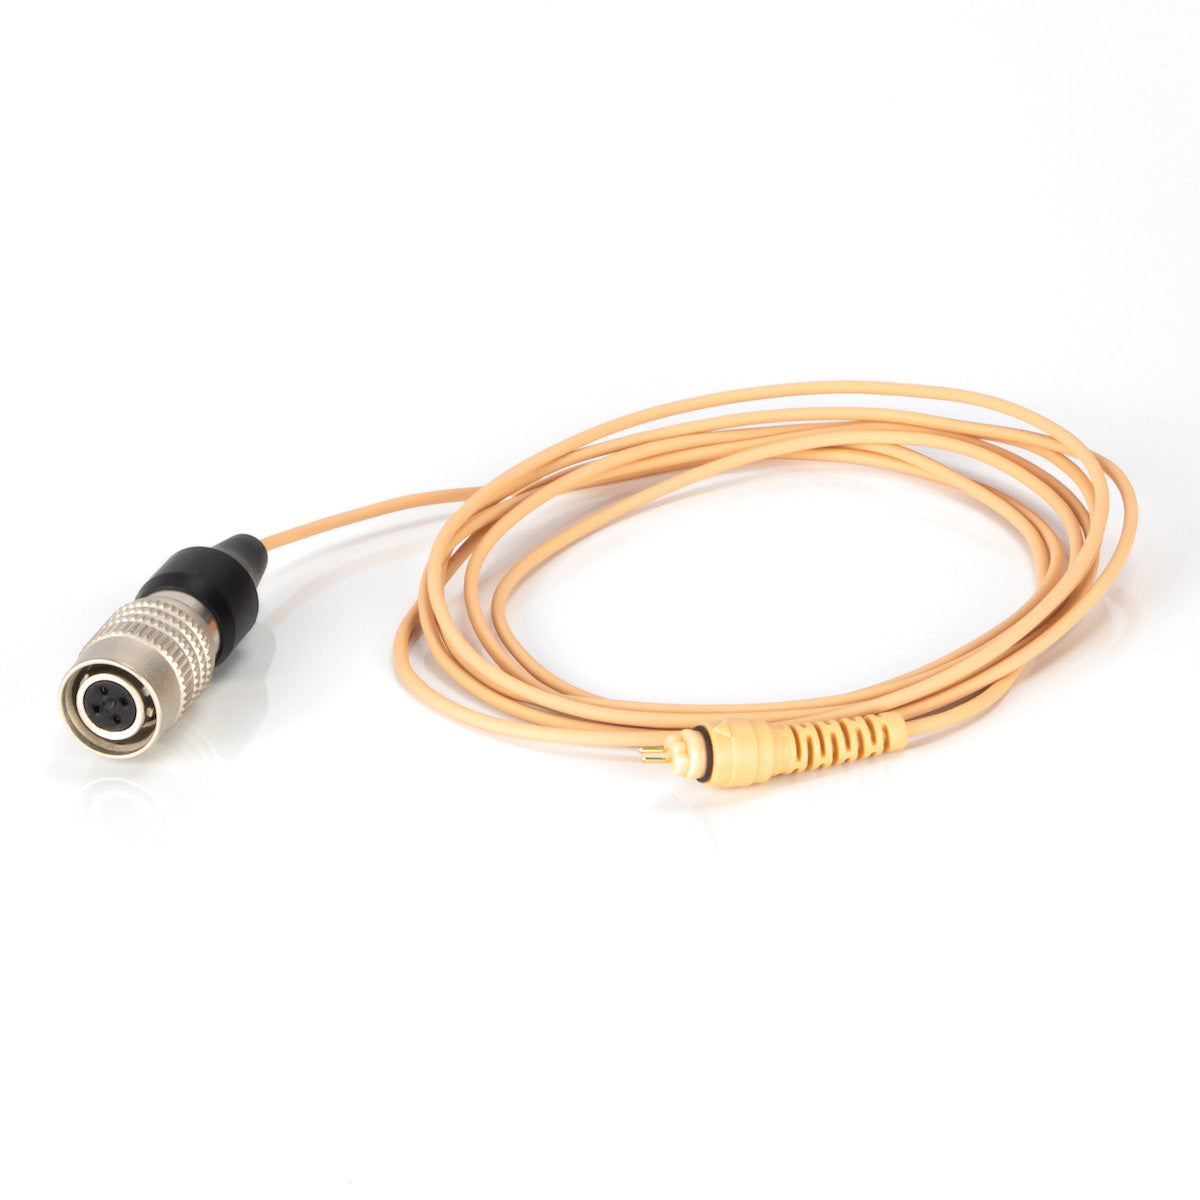 THOR Hammer SE Microphone Replacement Cable, Hilrose4 tan